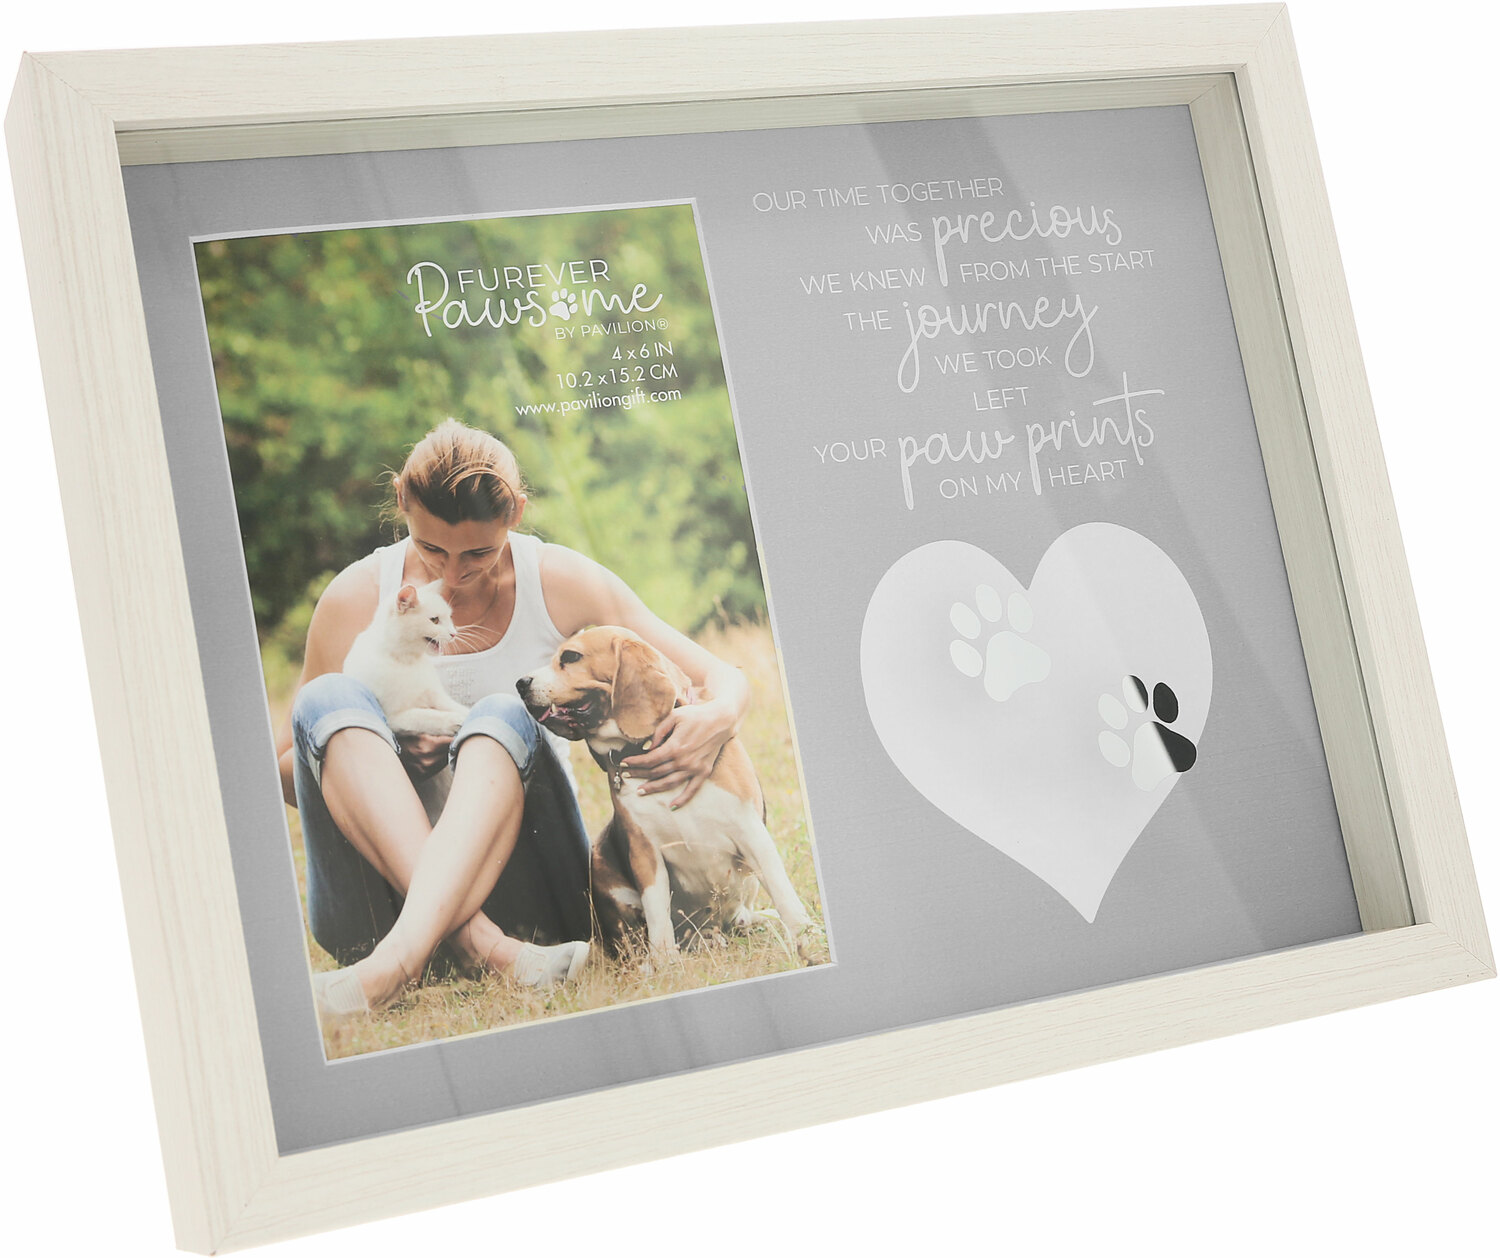 The Journey by Furever Pawsome - The Journey - 9.5" x 7.5" Shadow Box Frame
(Holds 4" x 6" Photo)